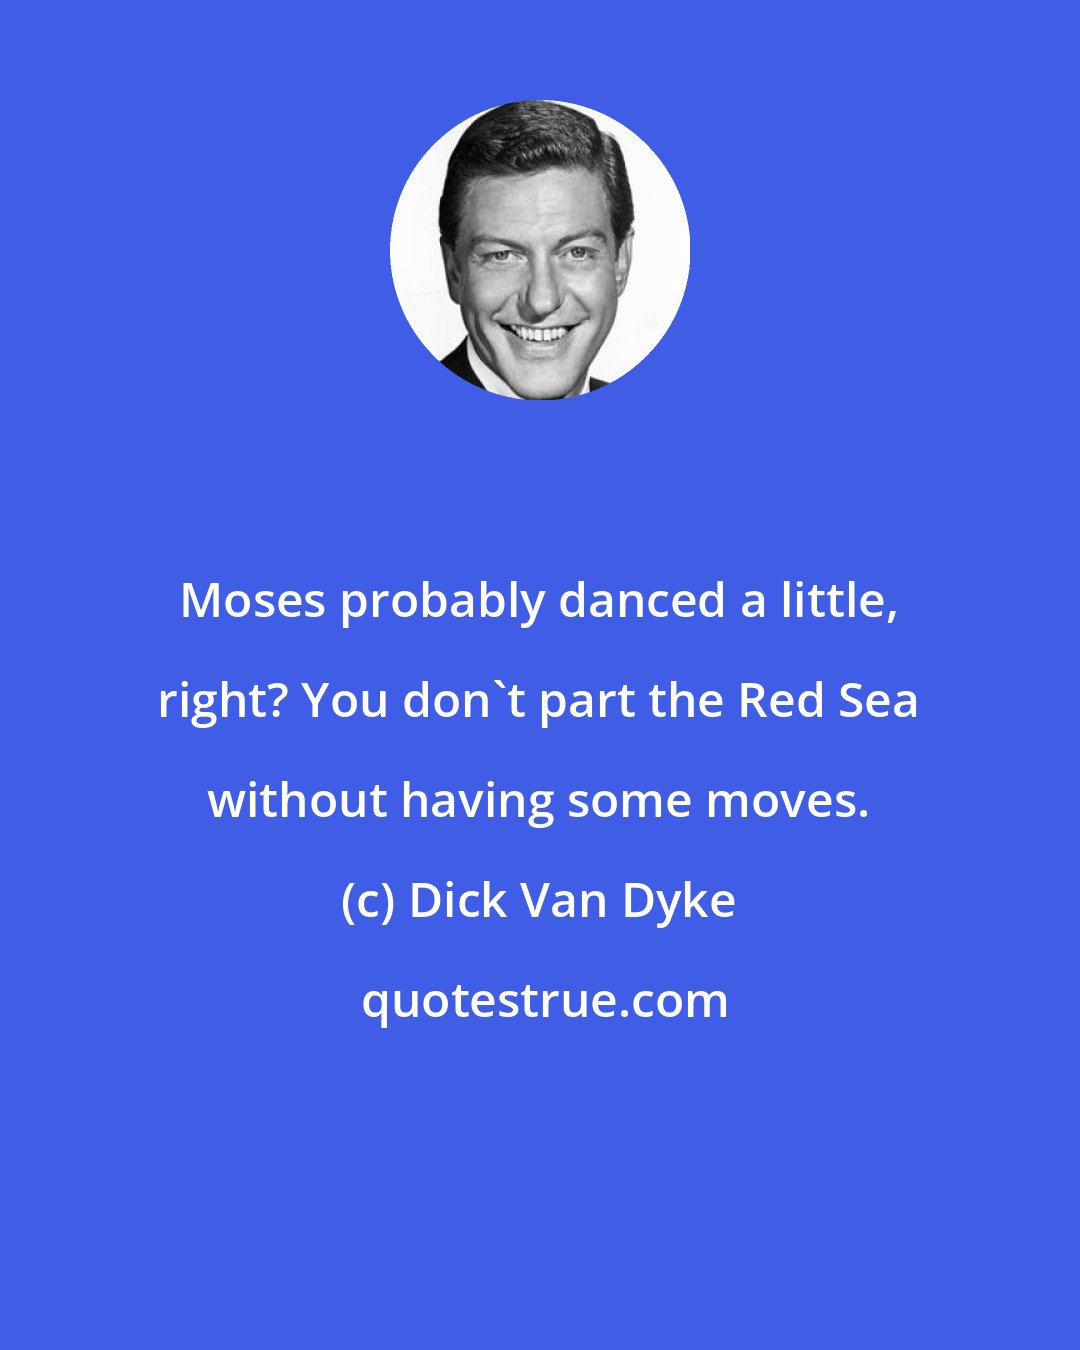 Dick Van Dyke: Moses probably danced a little, right? You don't part the Red Sea without having some moves.